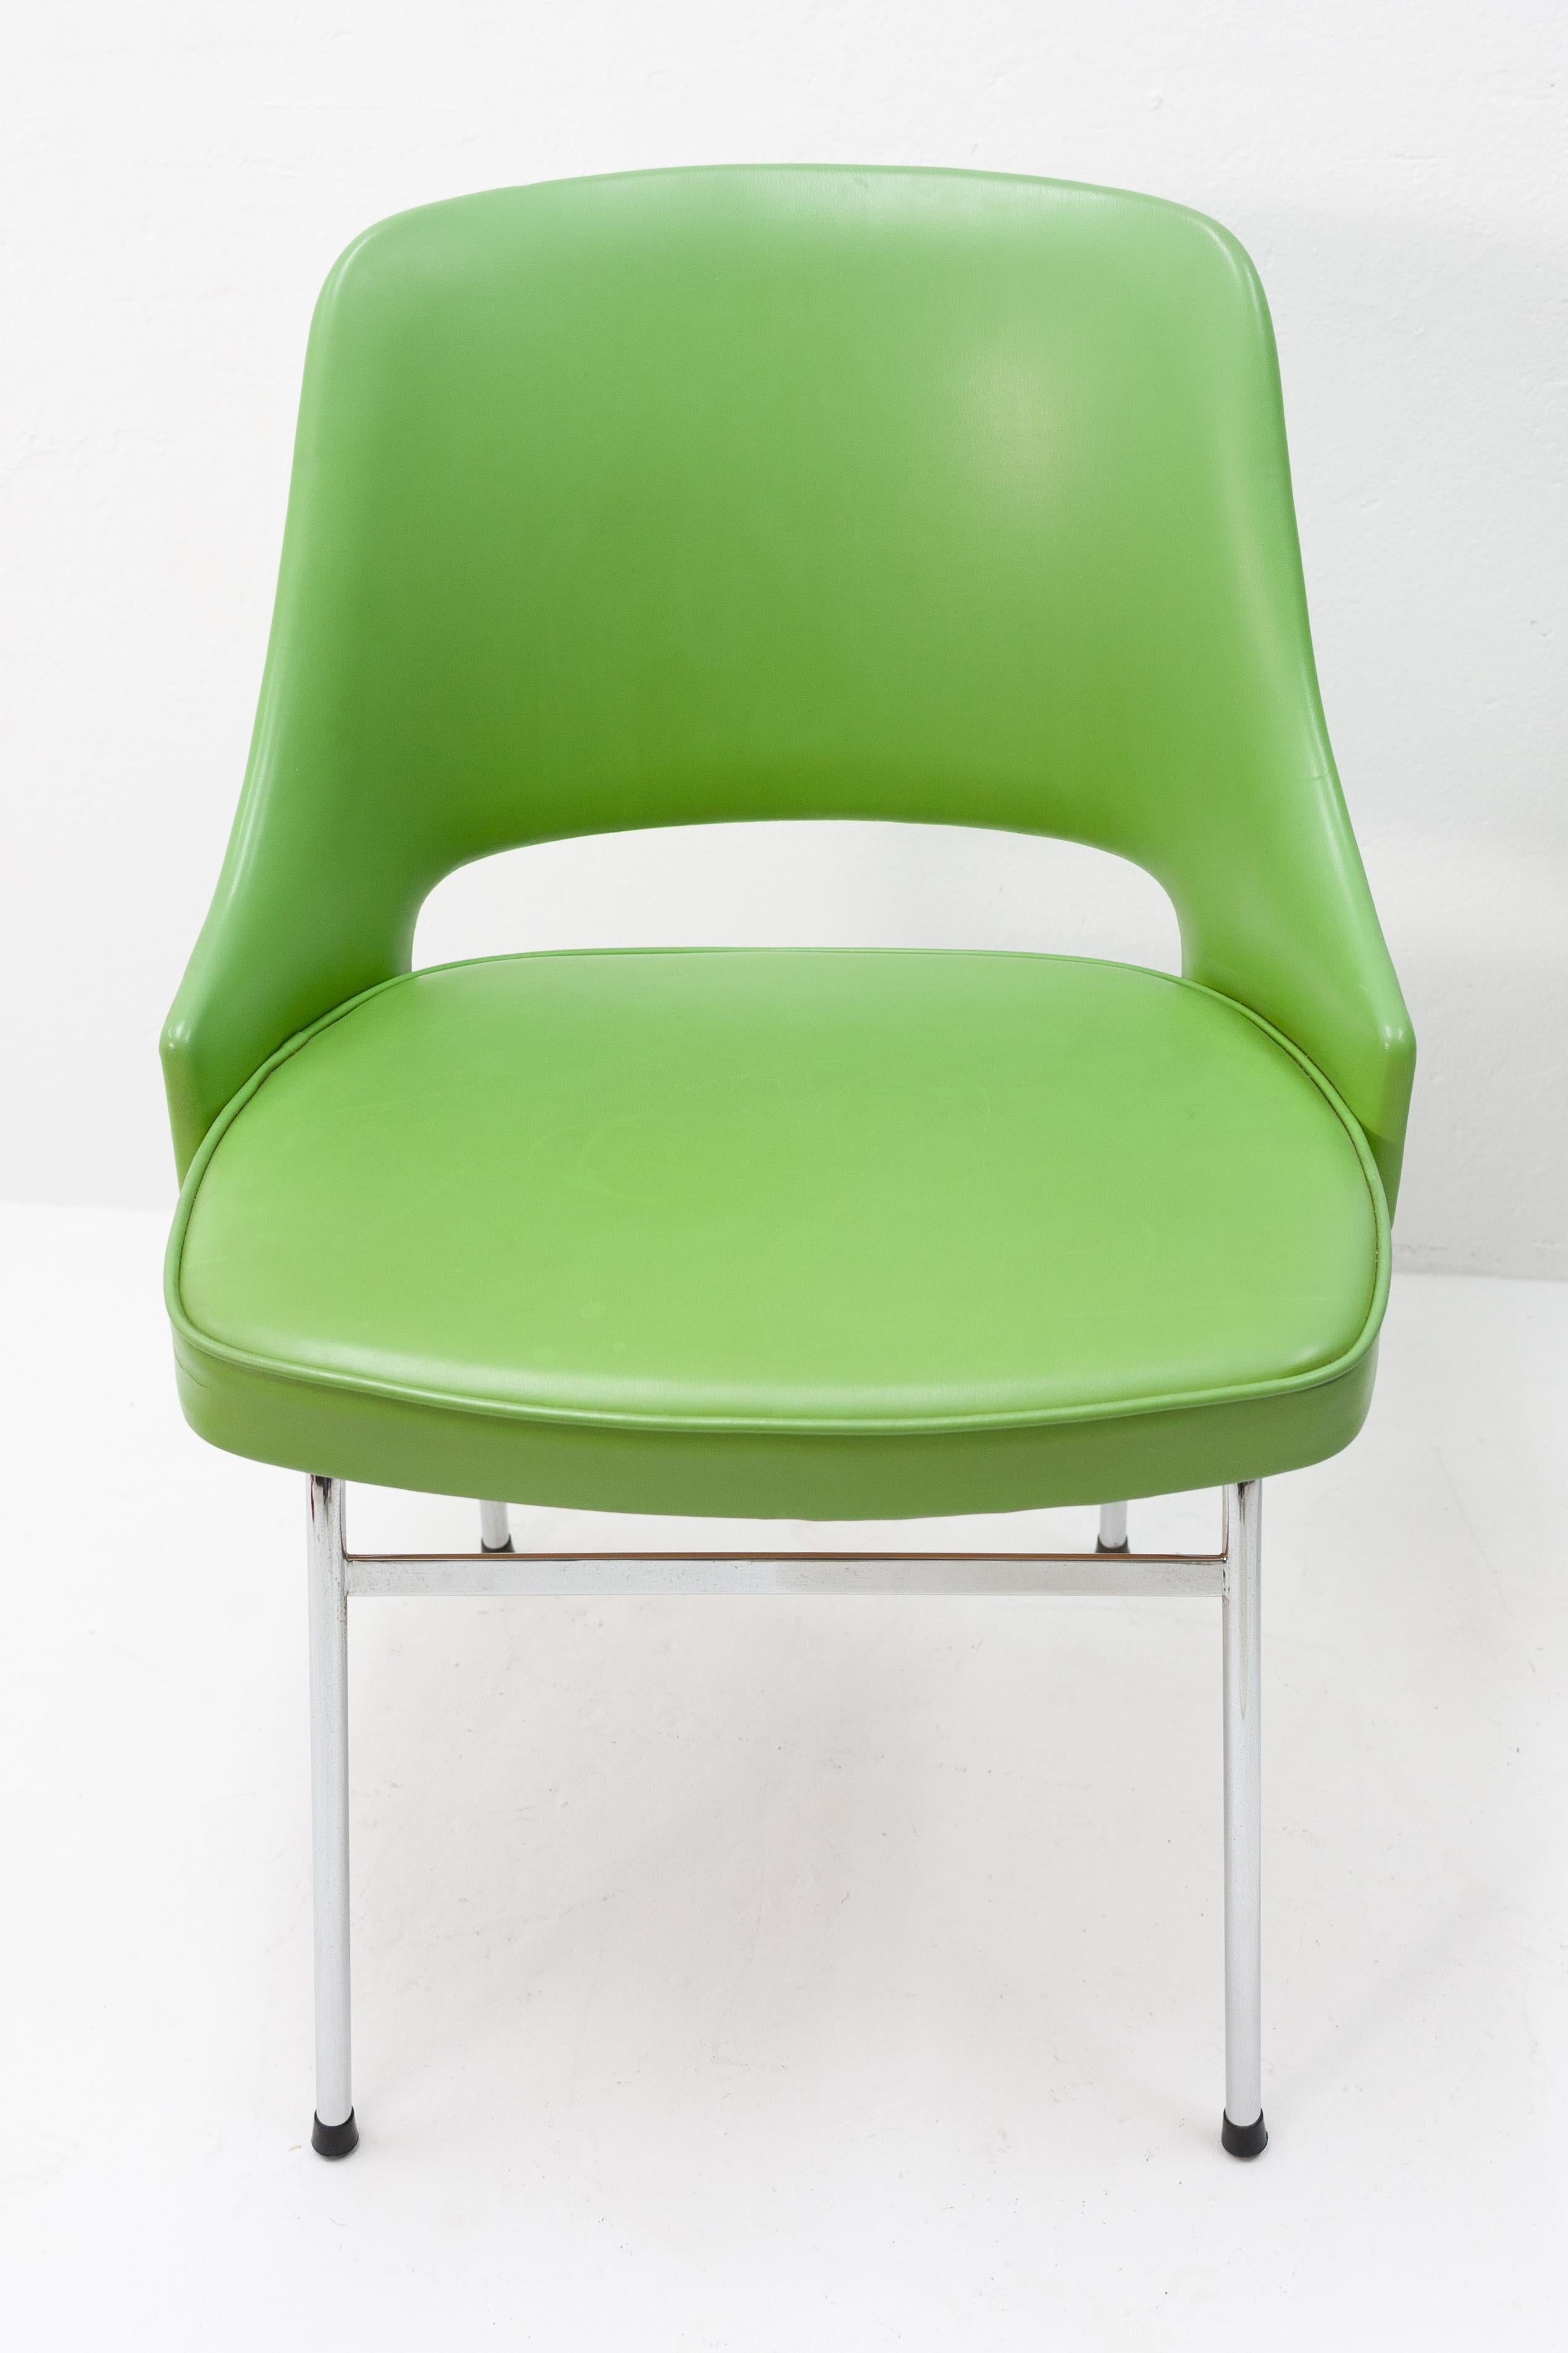 Two FM32 chairs  Very nice designed chairs, By Cees Braakman  for Pastoe   in a apples green color. Trimmed width head nails ,All original 1950s good condition 
